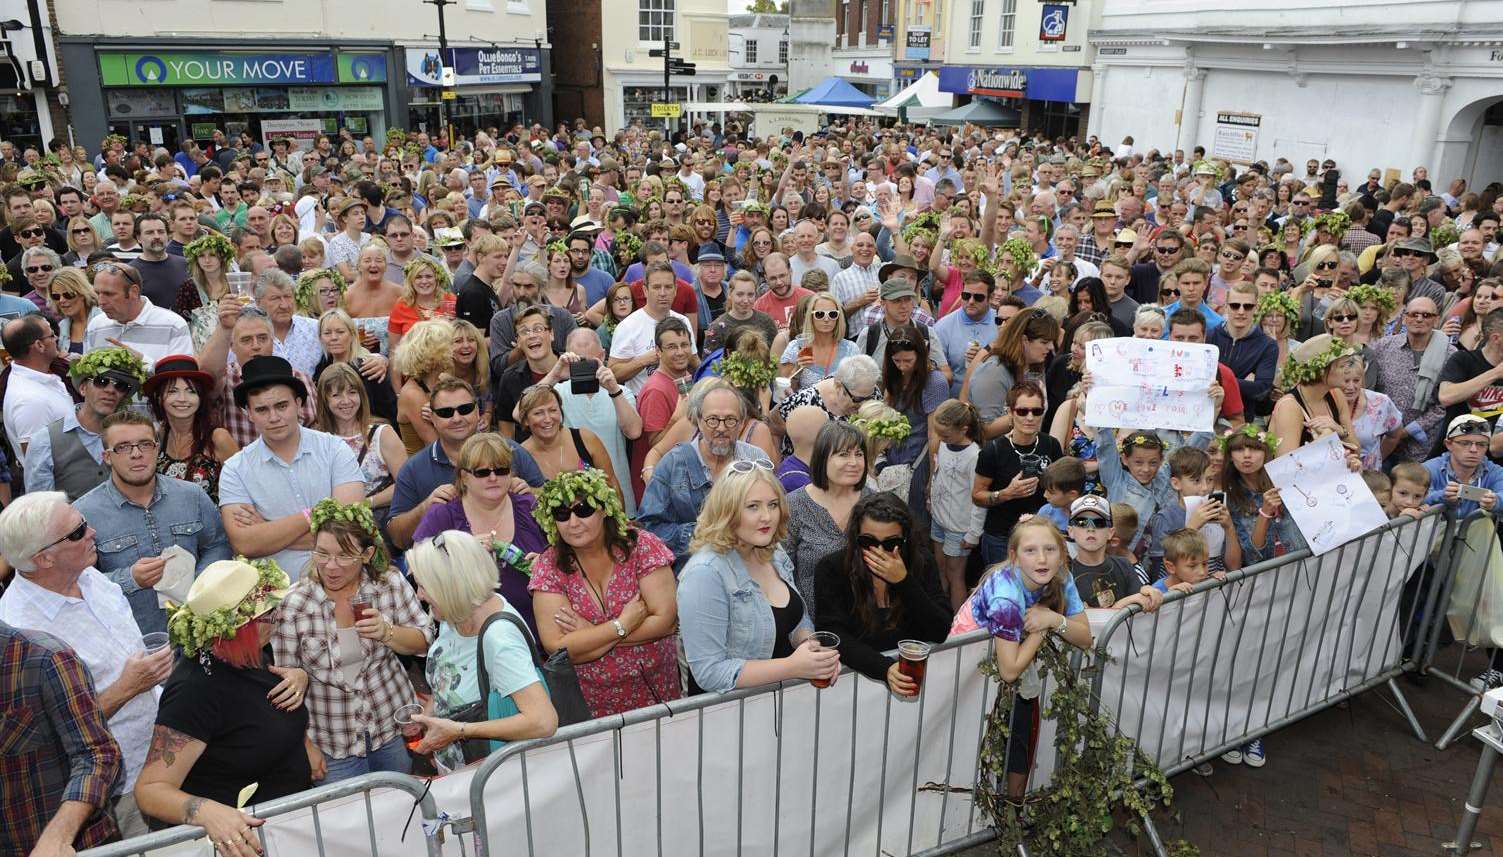 Crowds gathered in Faversham town centre